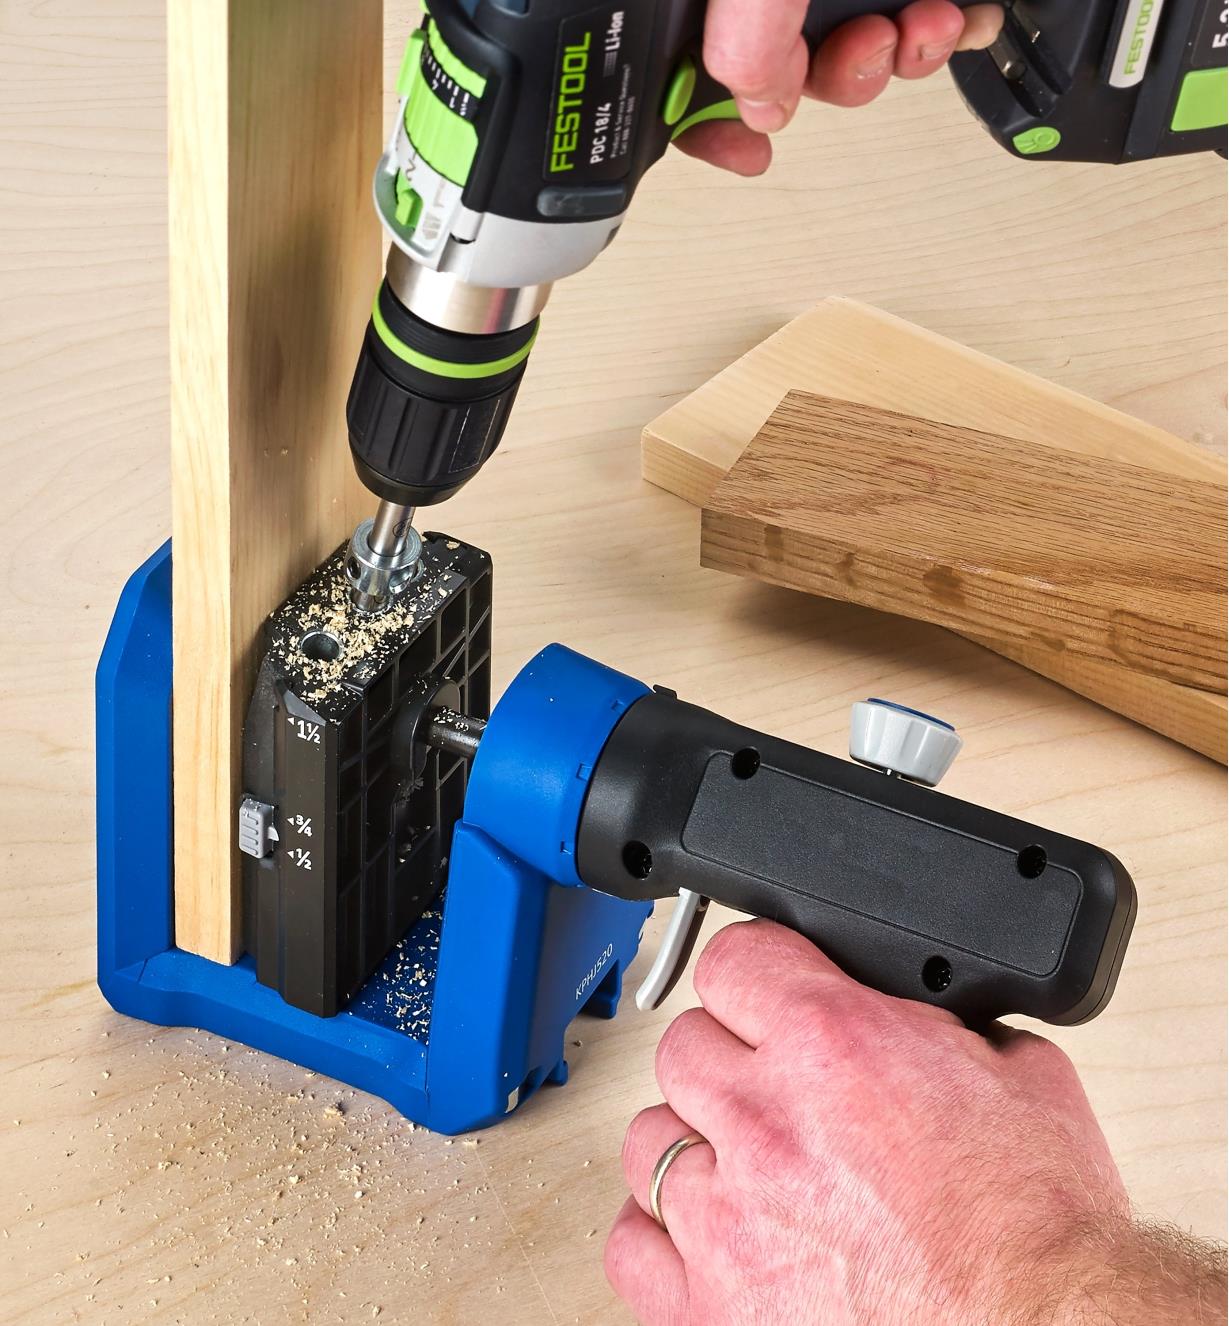 Drilling pocket holes with a Kreg 520 Pro jig, with the rotating clamp handle offset for clearance